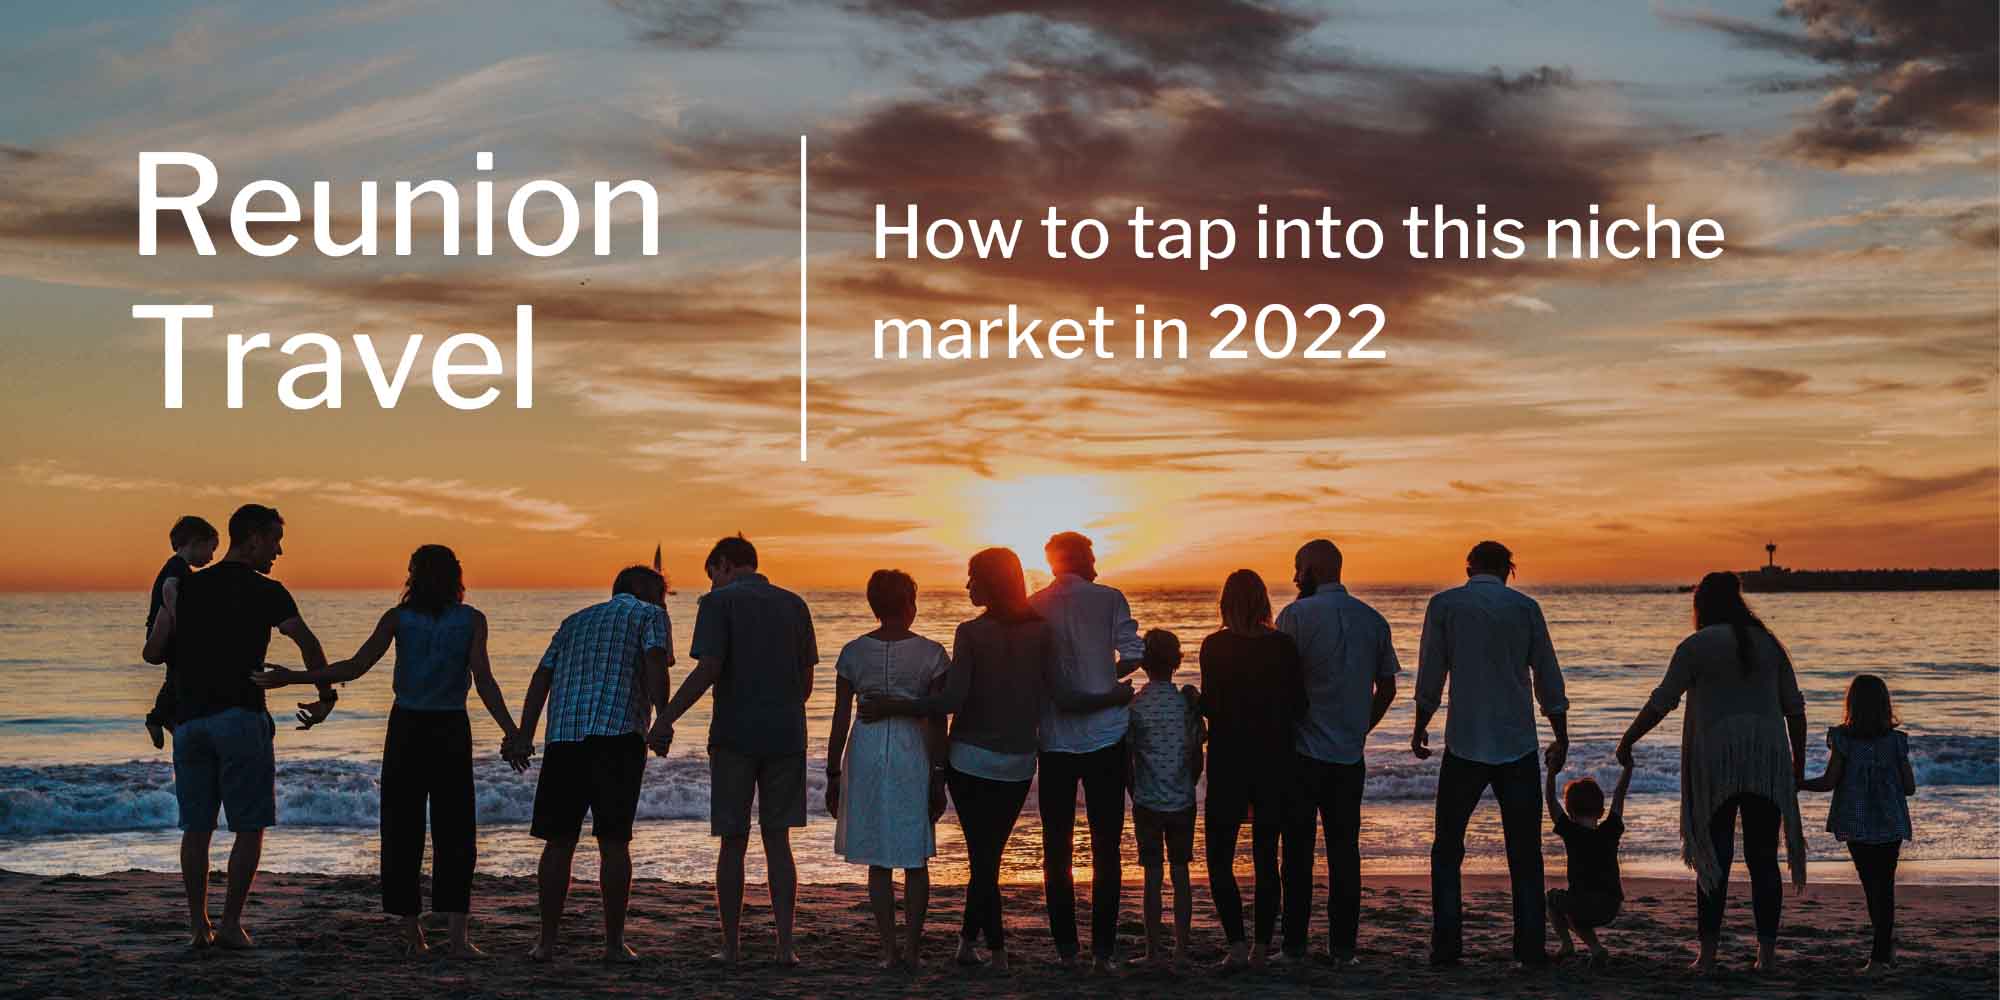 How to create tours for reunion travellers in 2022